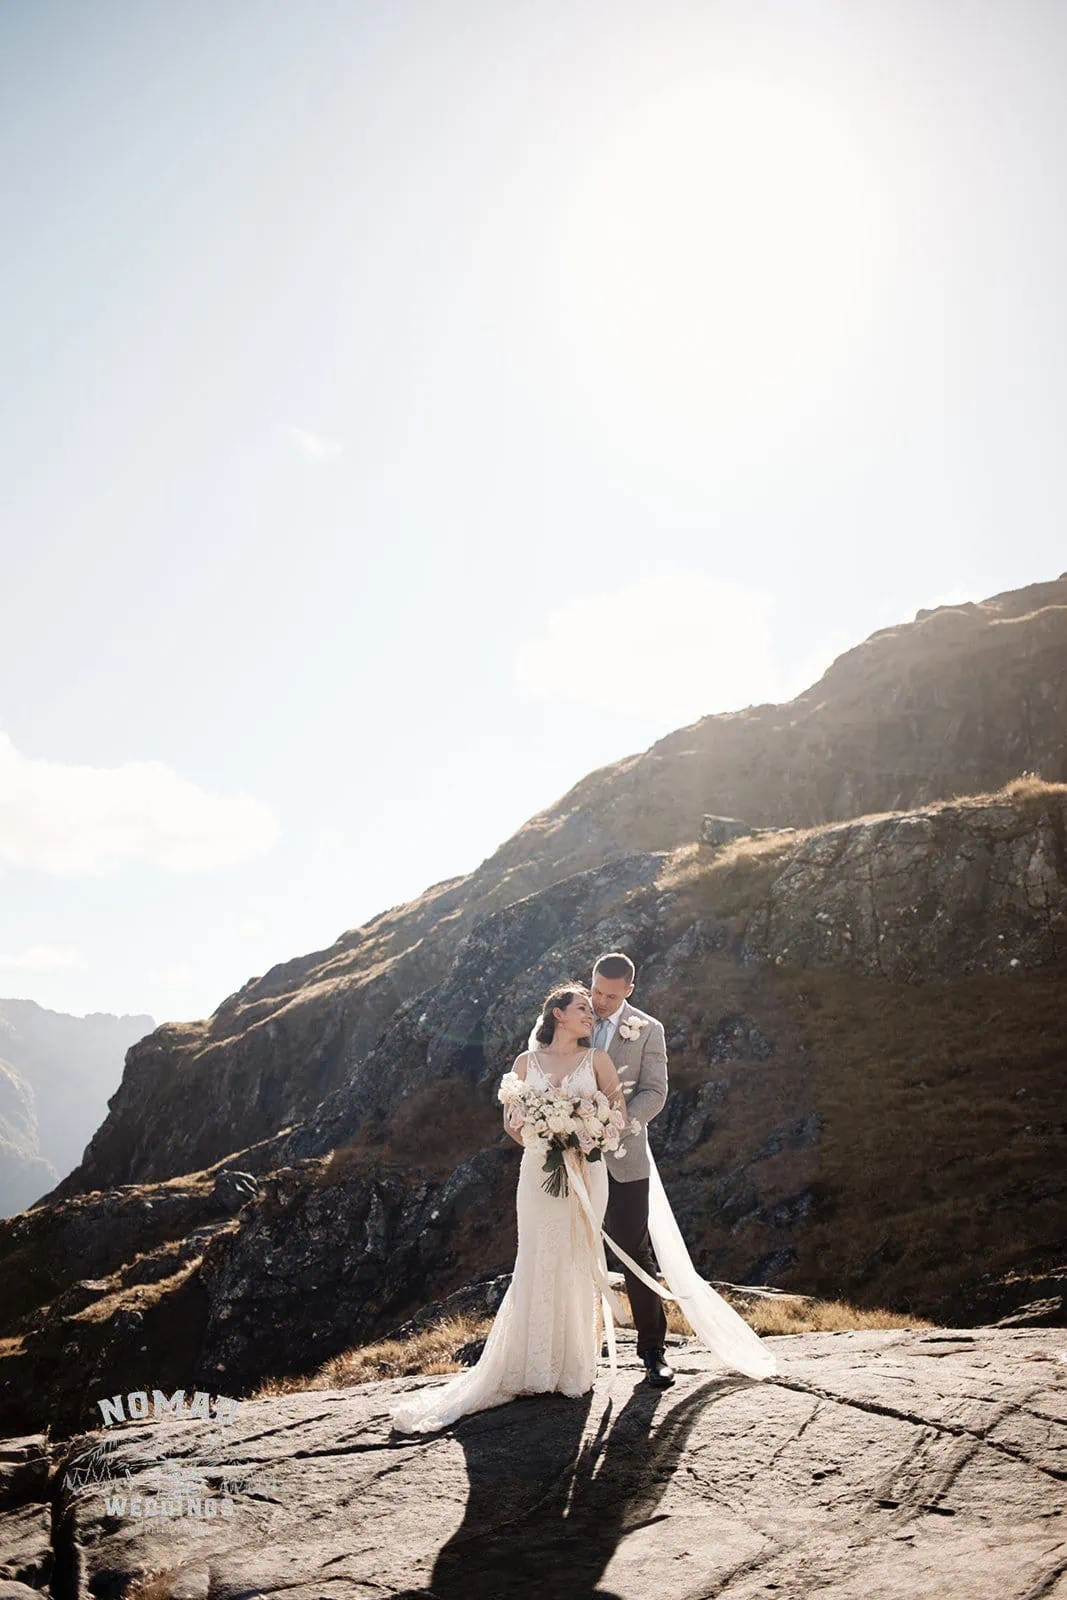 Amy and Eden's enchanting heli elopement wedding at Lake Erskine in the mountains.